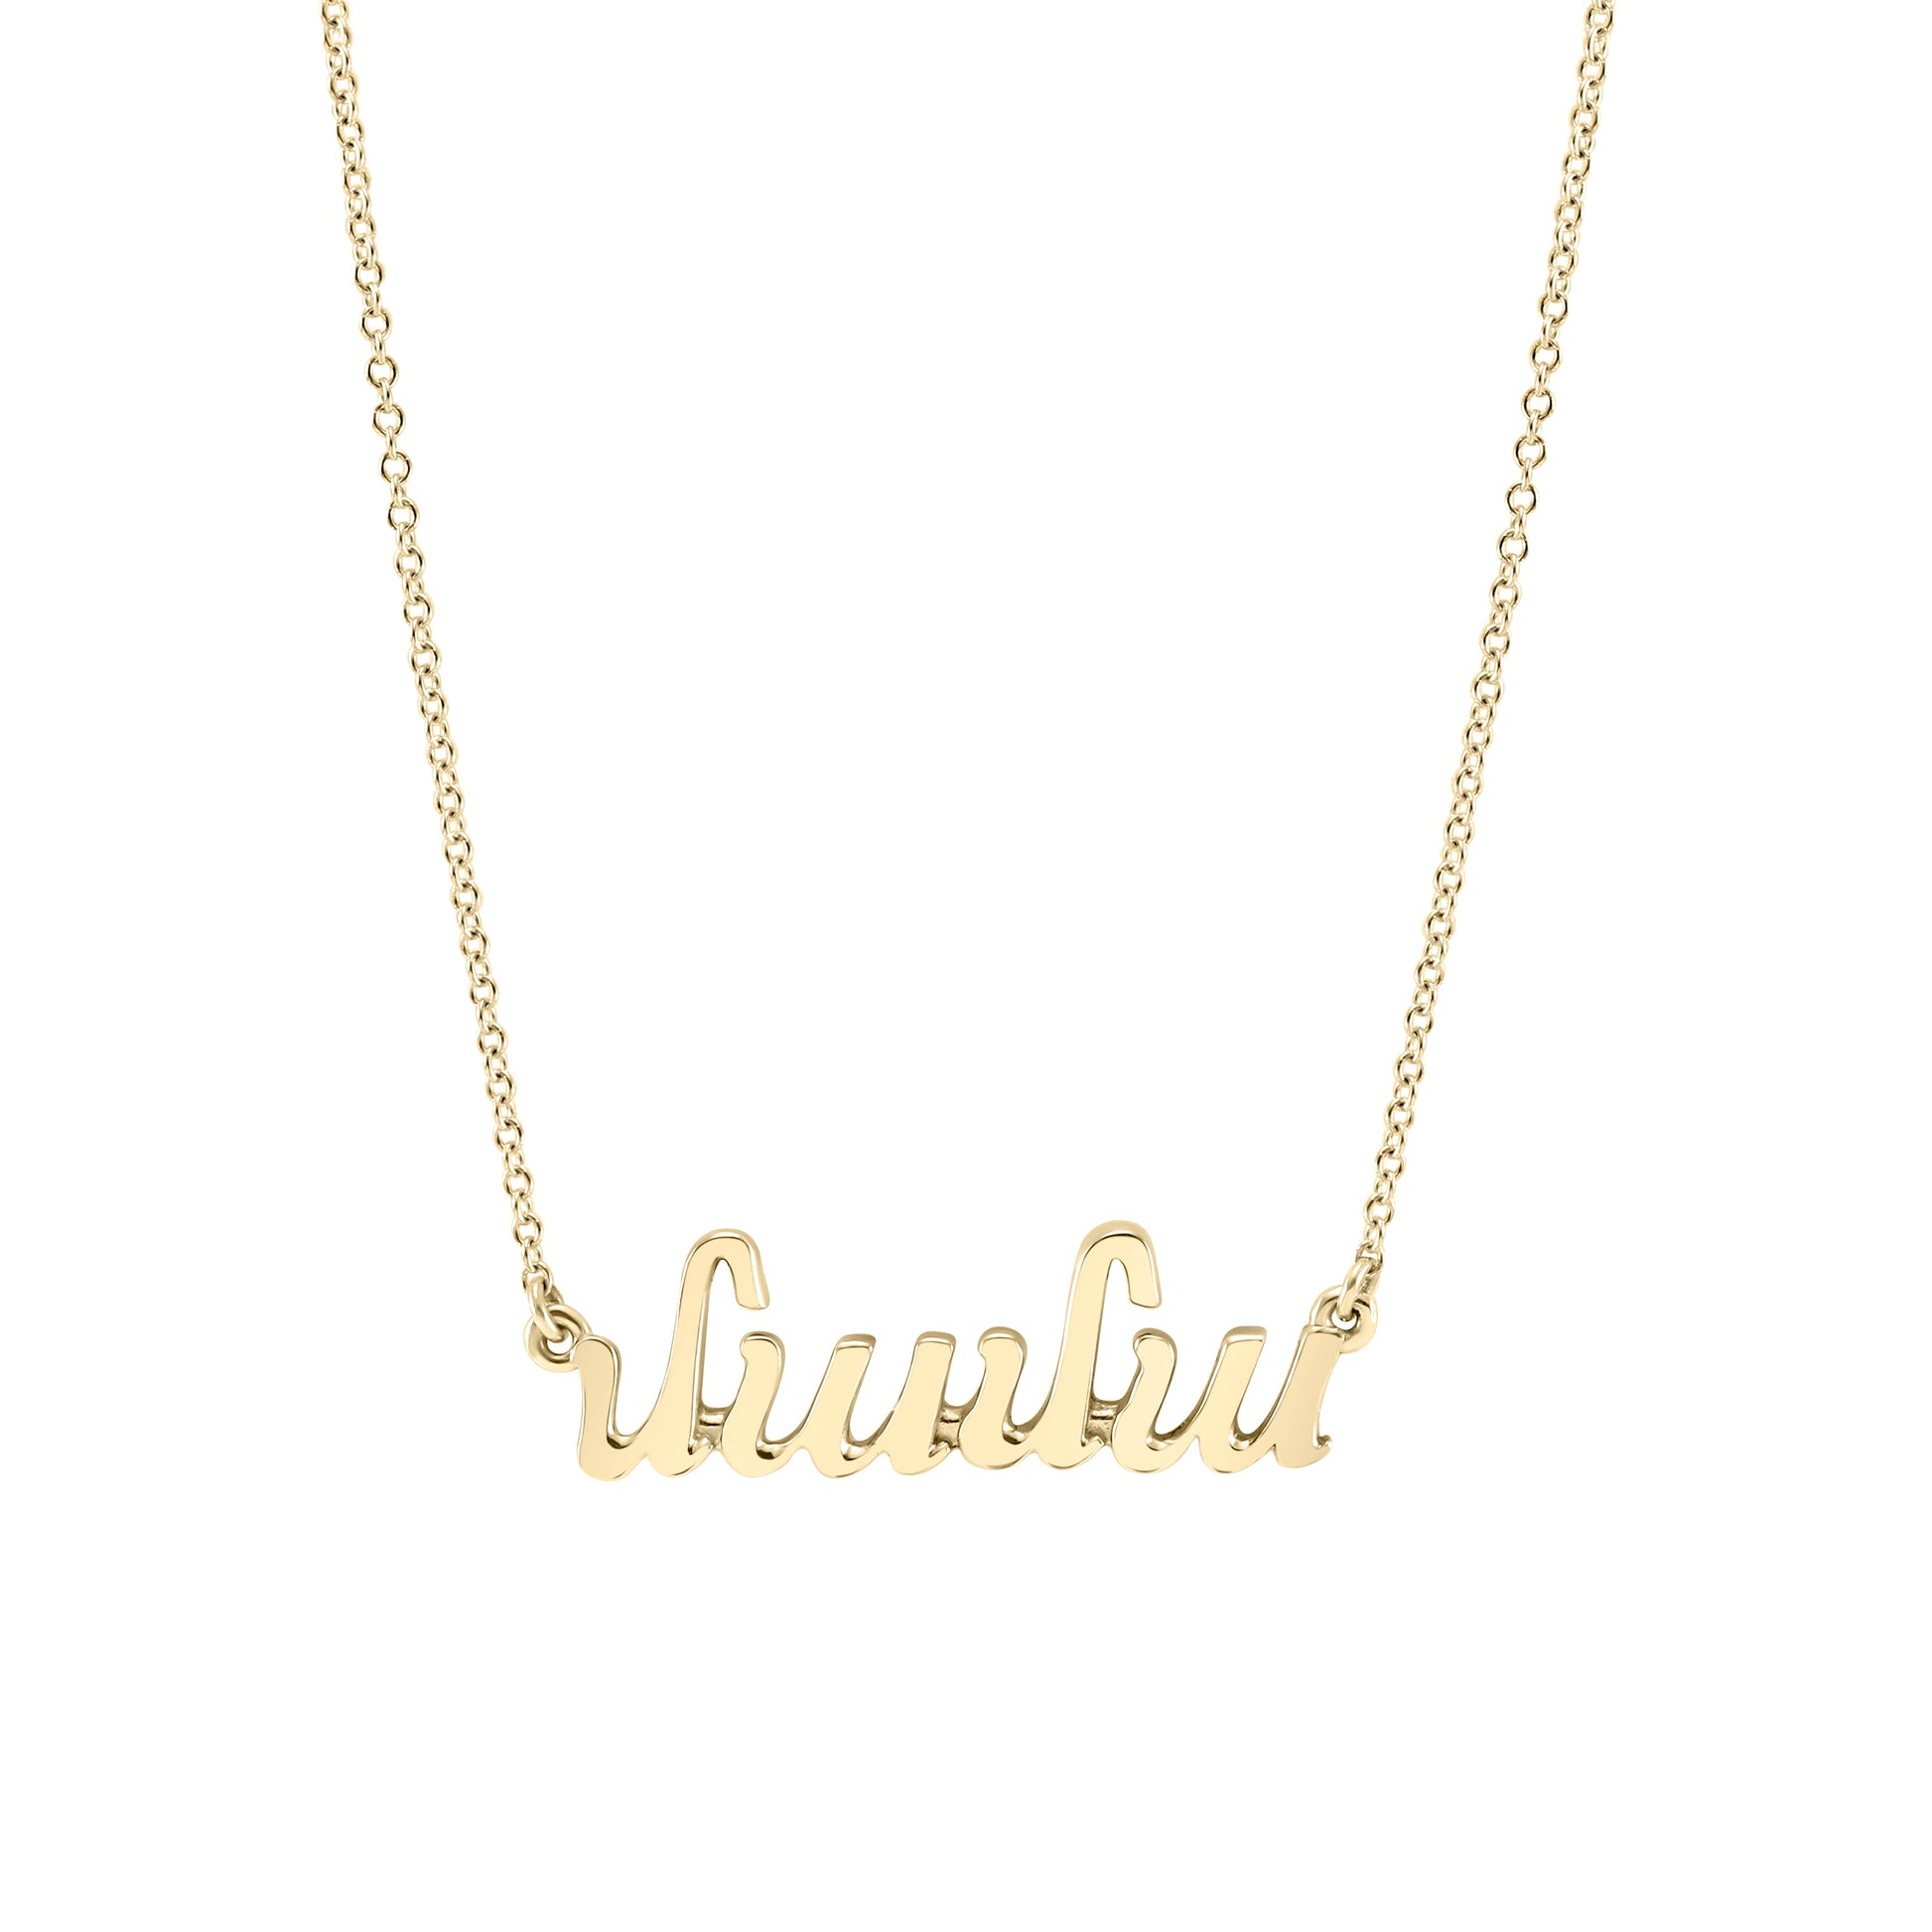 gold mama necklace Armenian letters